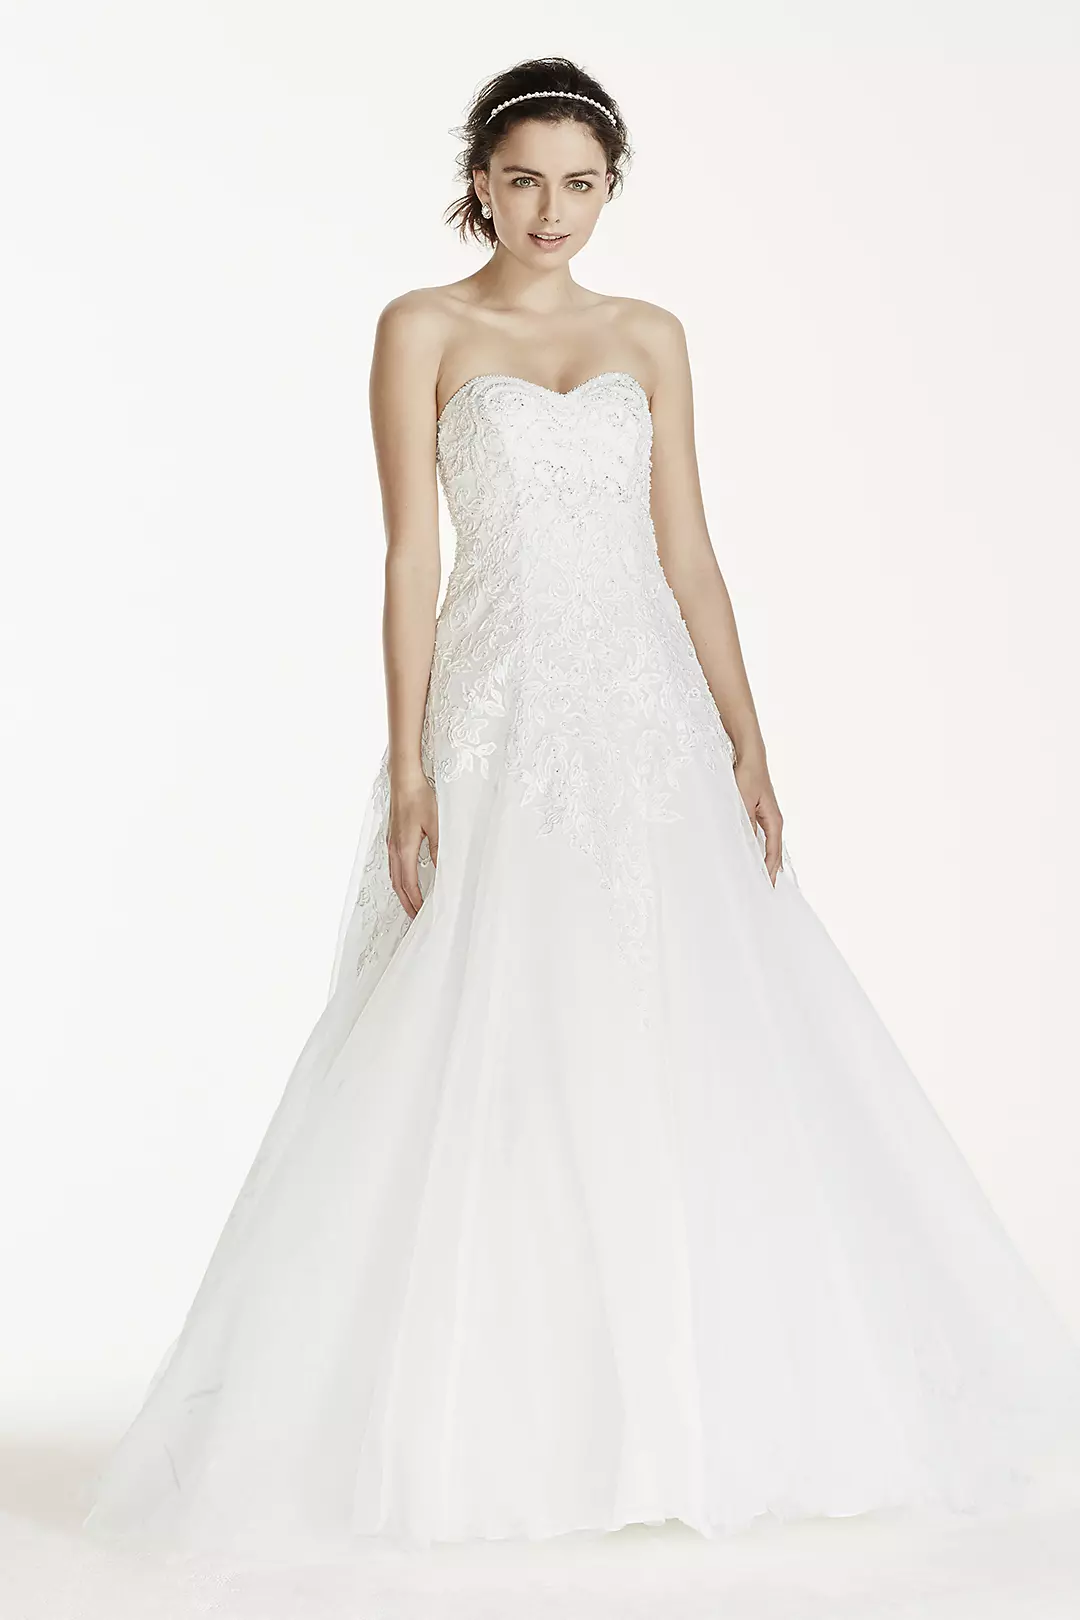 As-Is Jewel Tulle Wedding Dress with Lace Applique Image